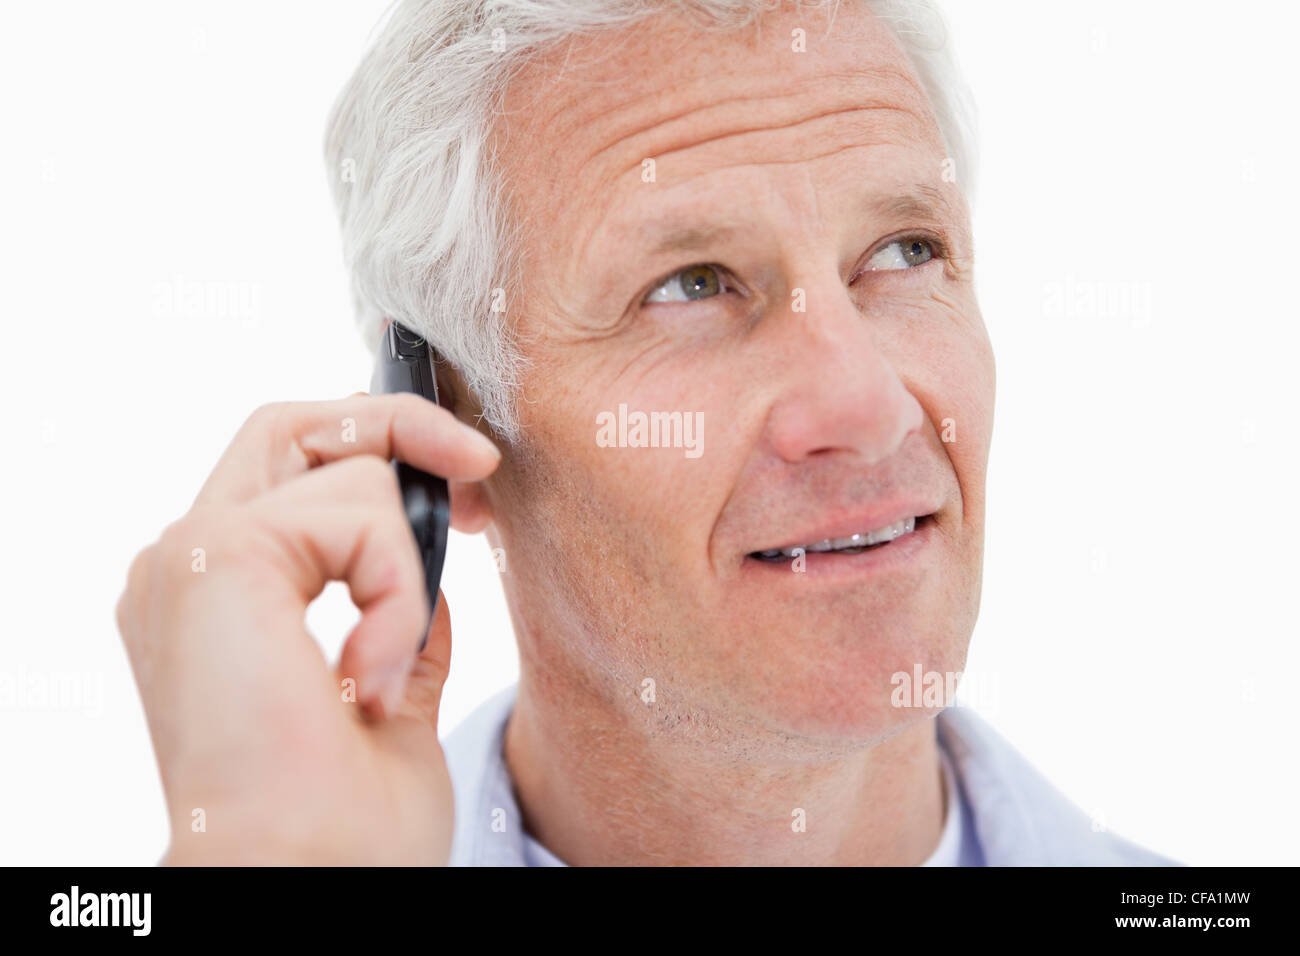 Mature man making a phone call while looking up Stock Photo